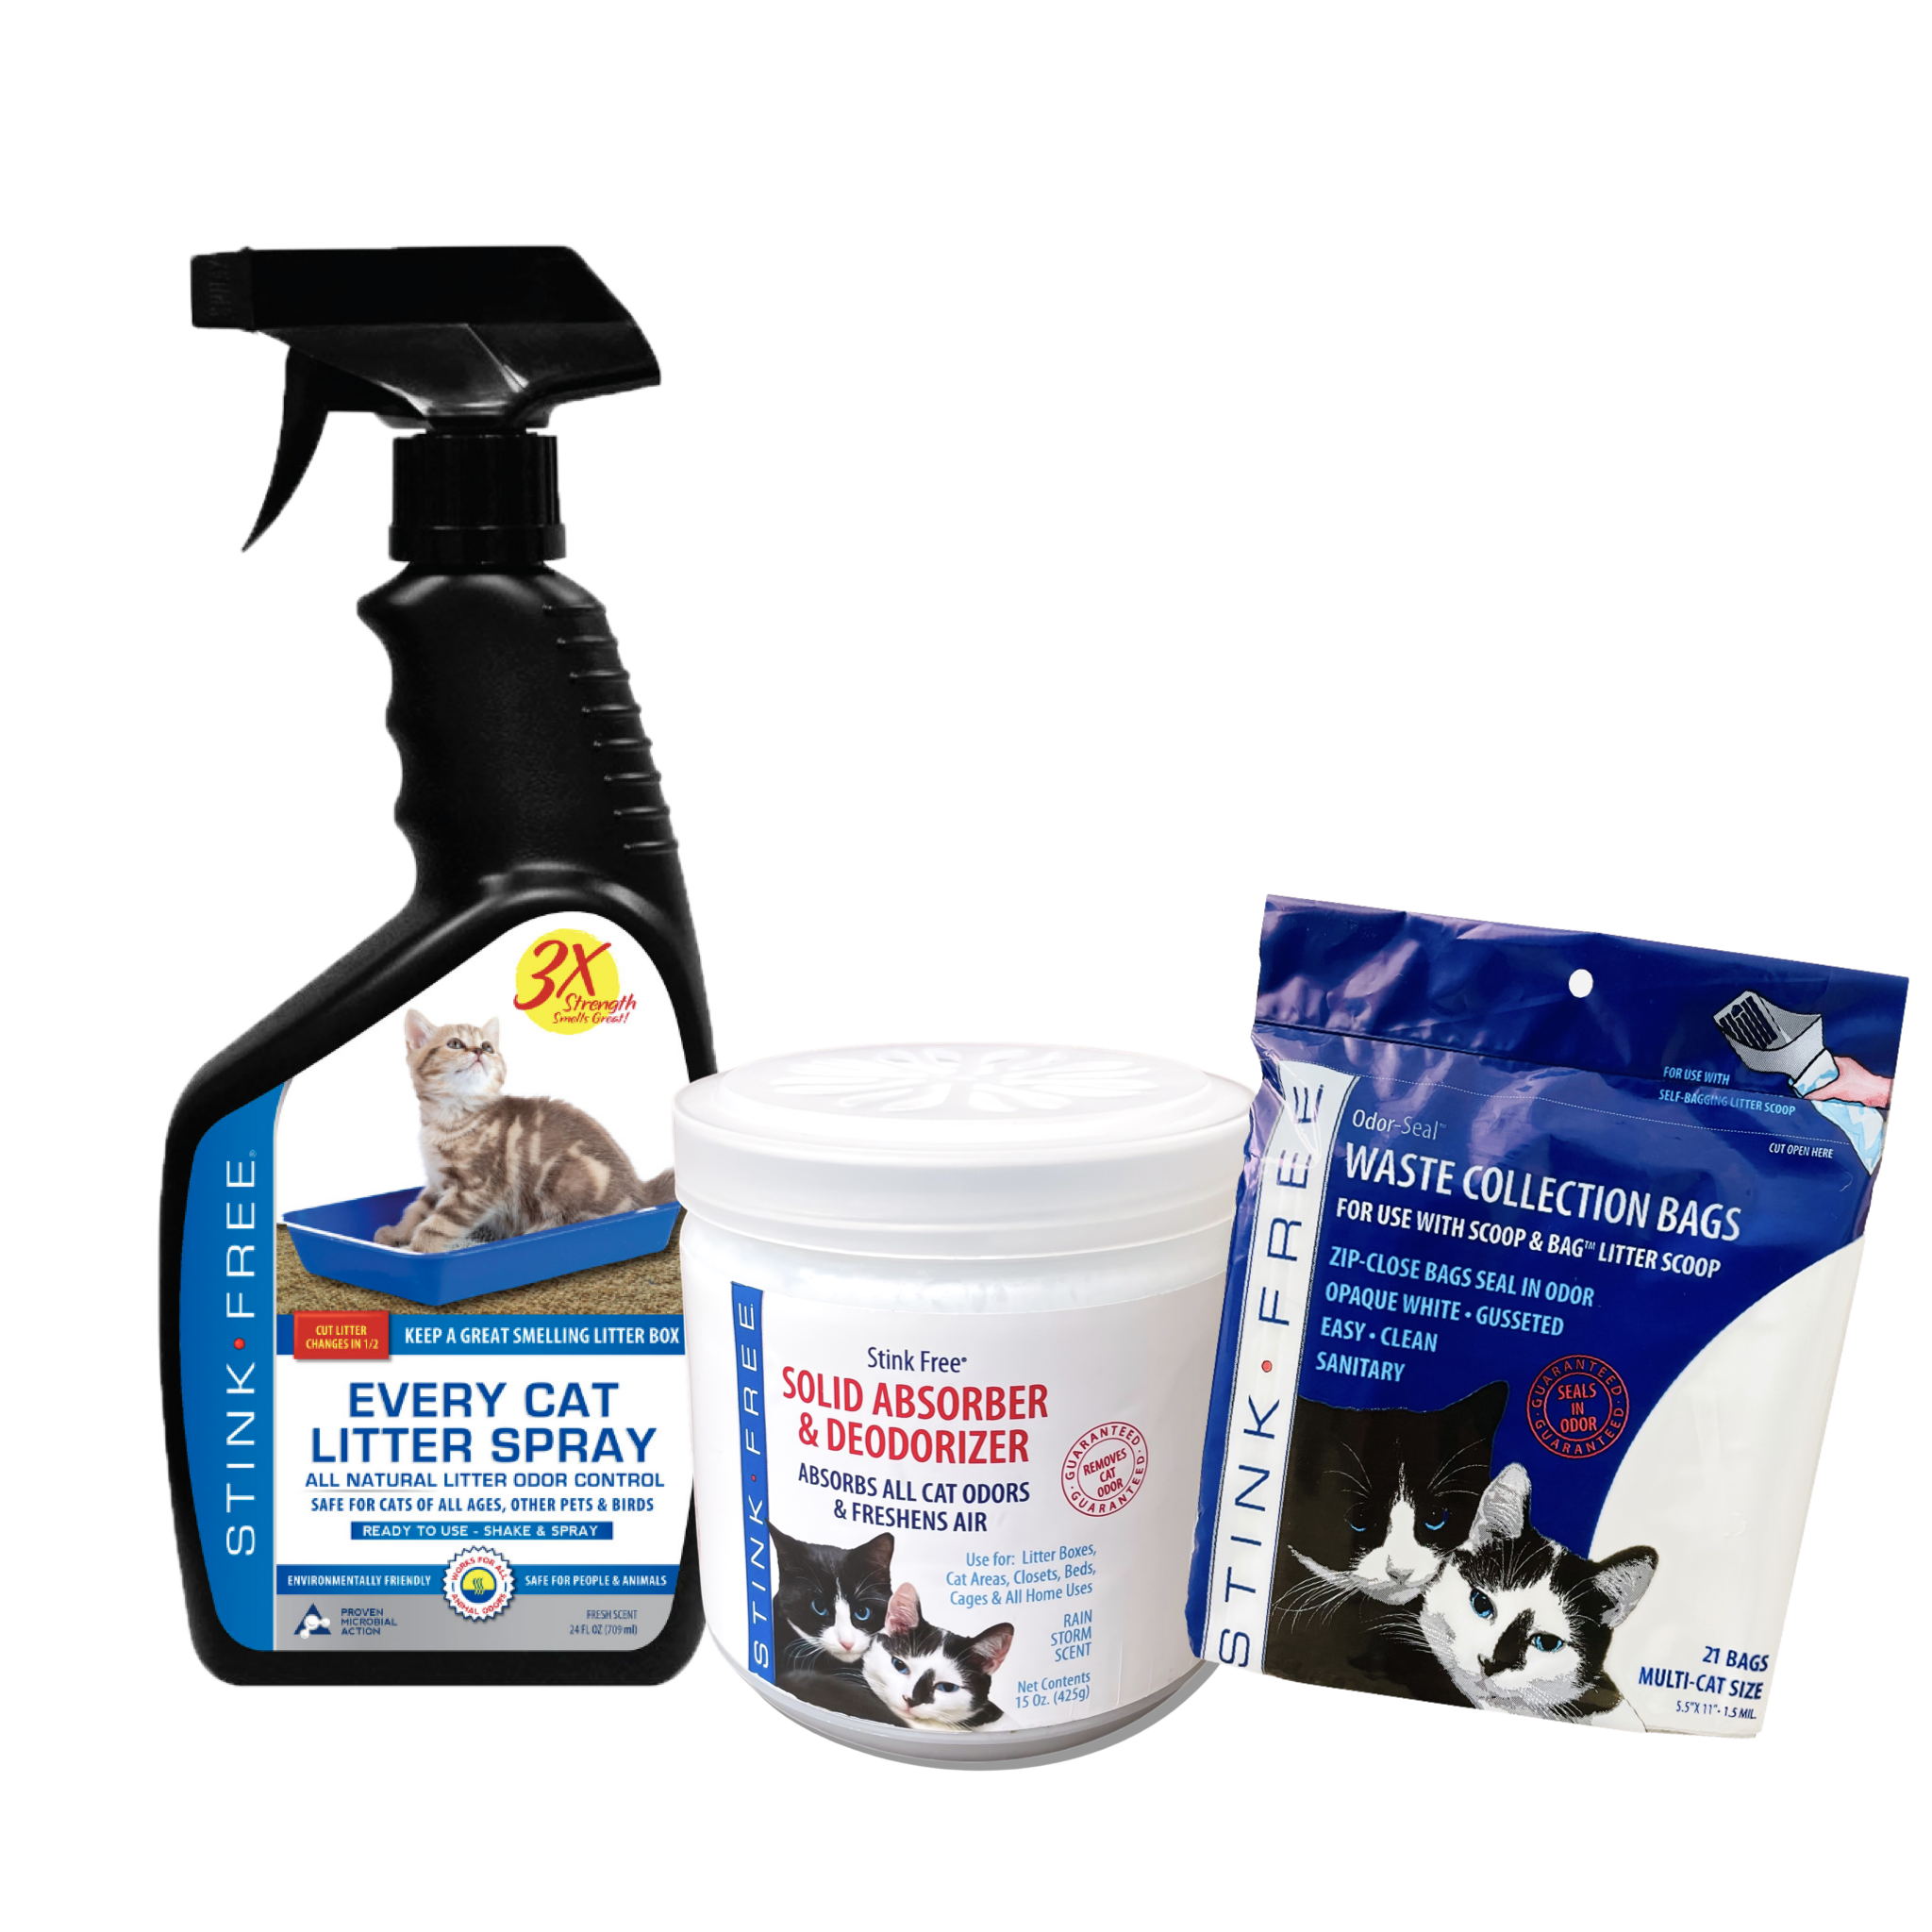 Every Cat Litter Spray, Rainstorm Solid Deodorizer for Cats & Pack of Odor Seal Waste Collection Bags